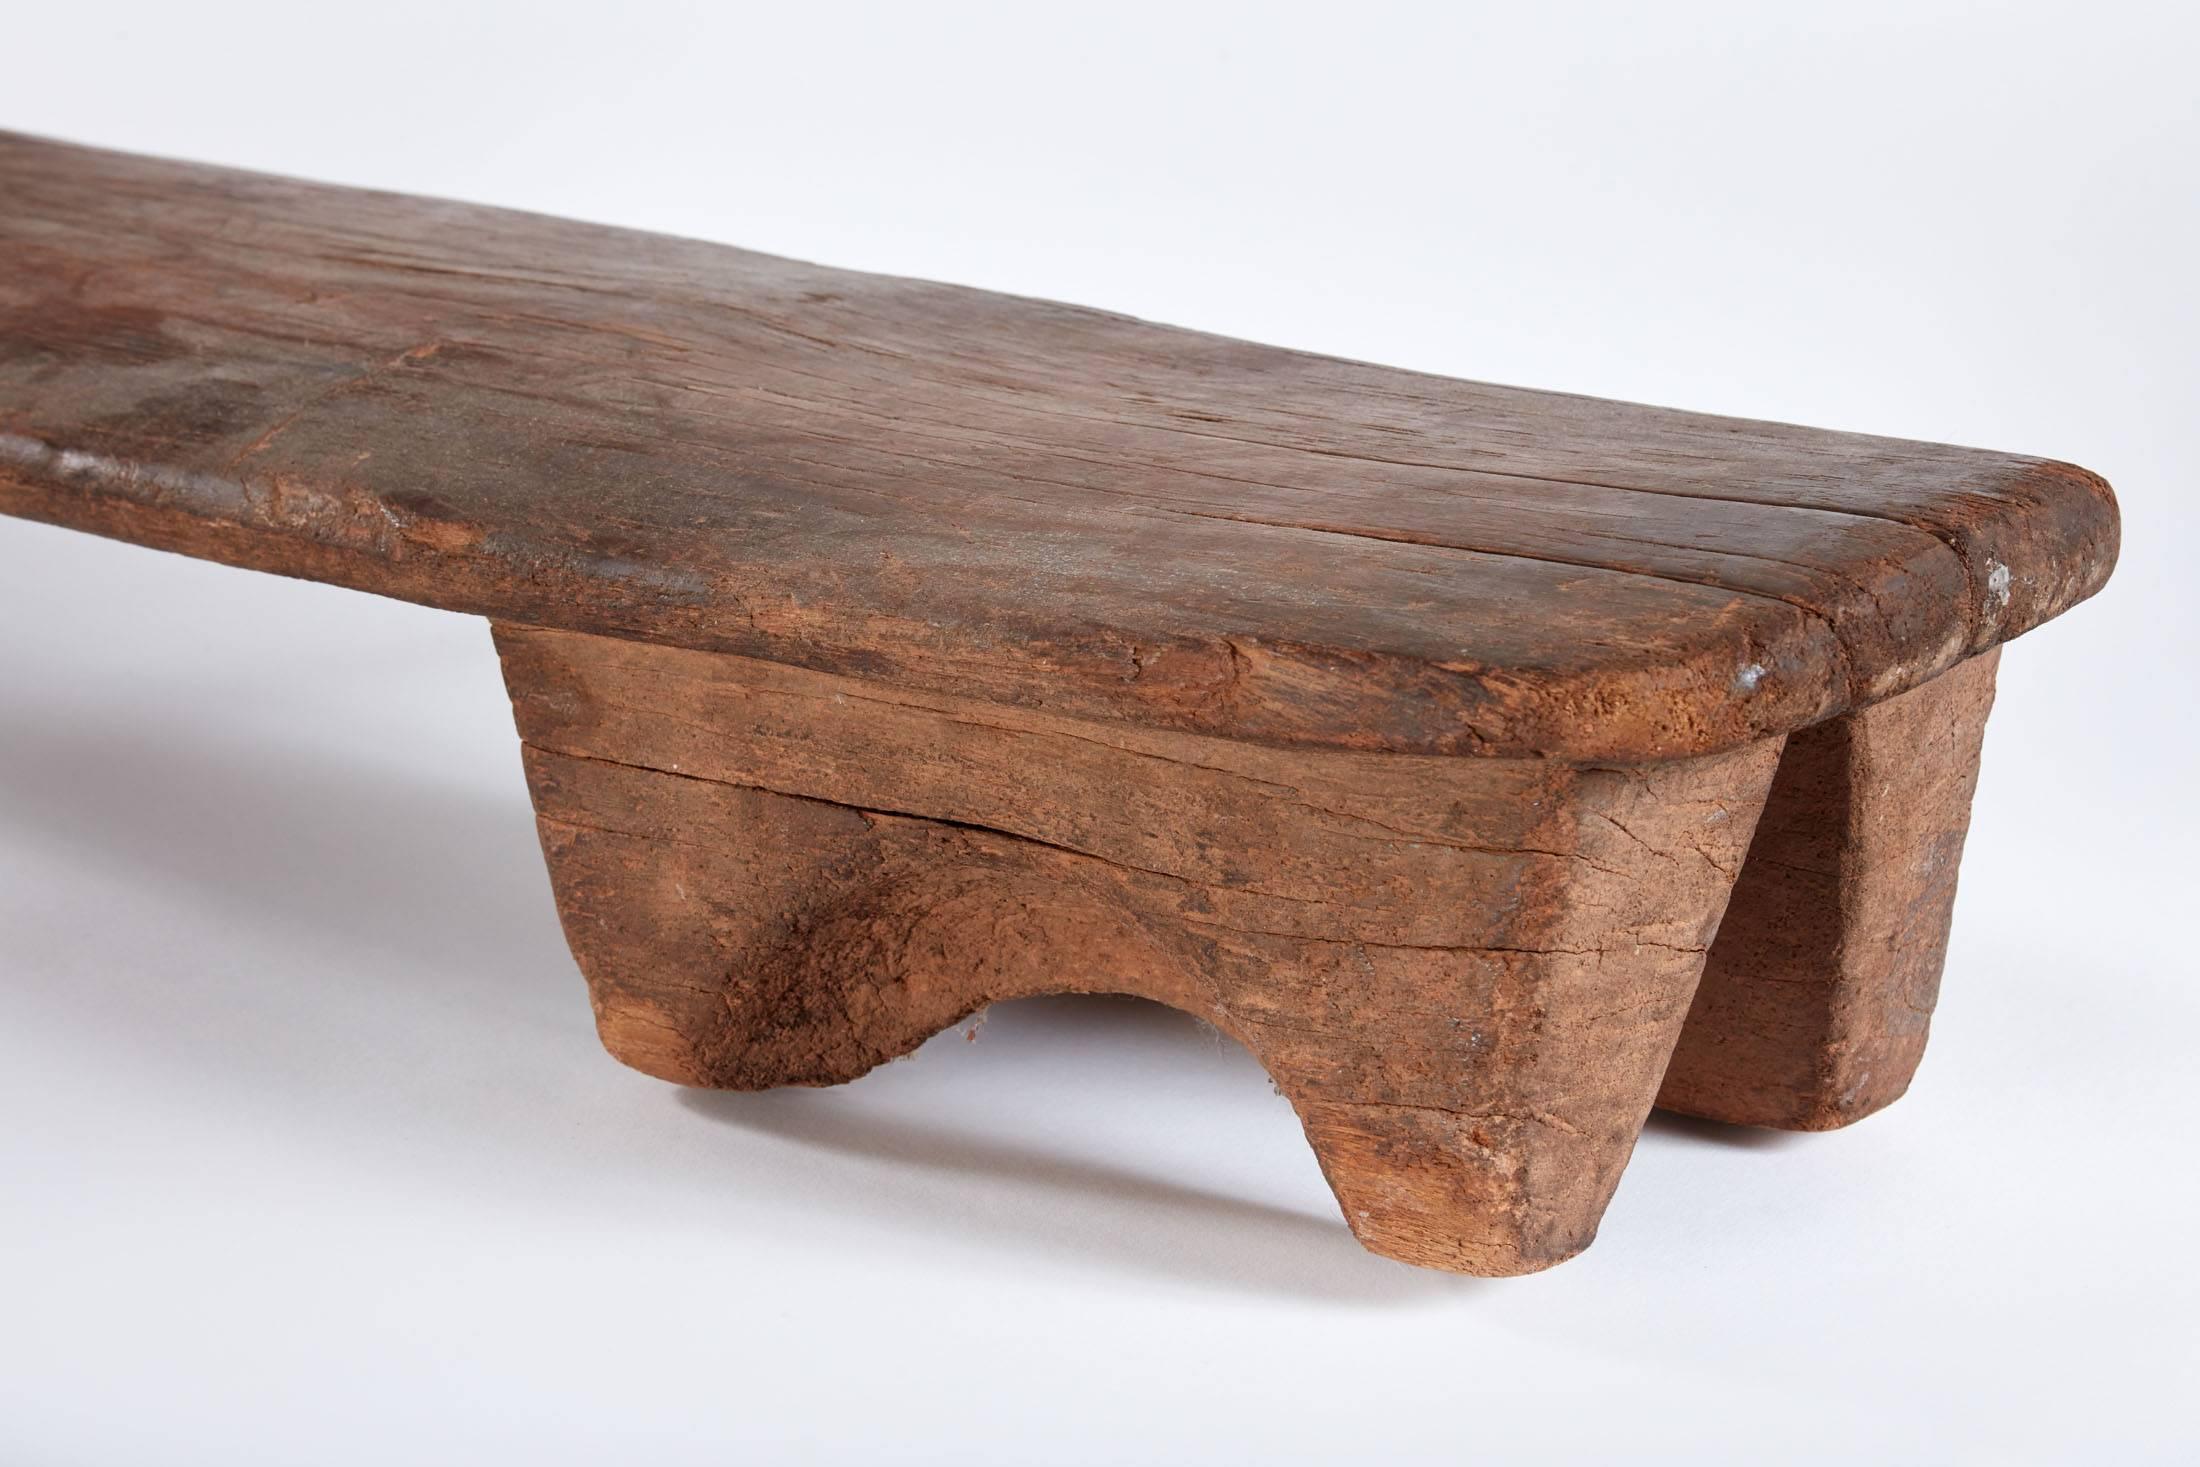 Early 20th century narrow wooden bench /stool from Cameroon.